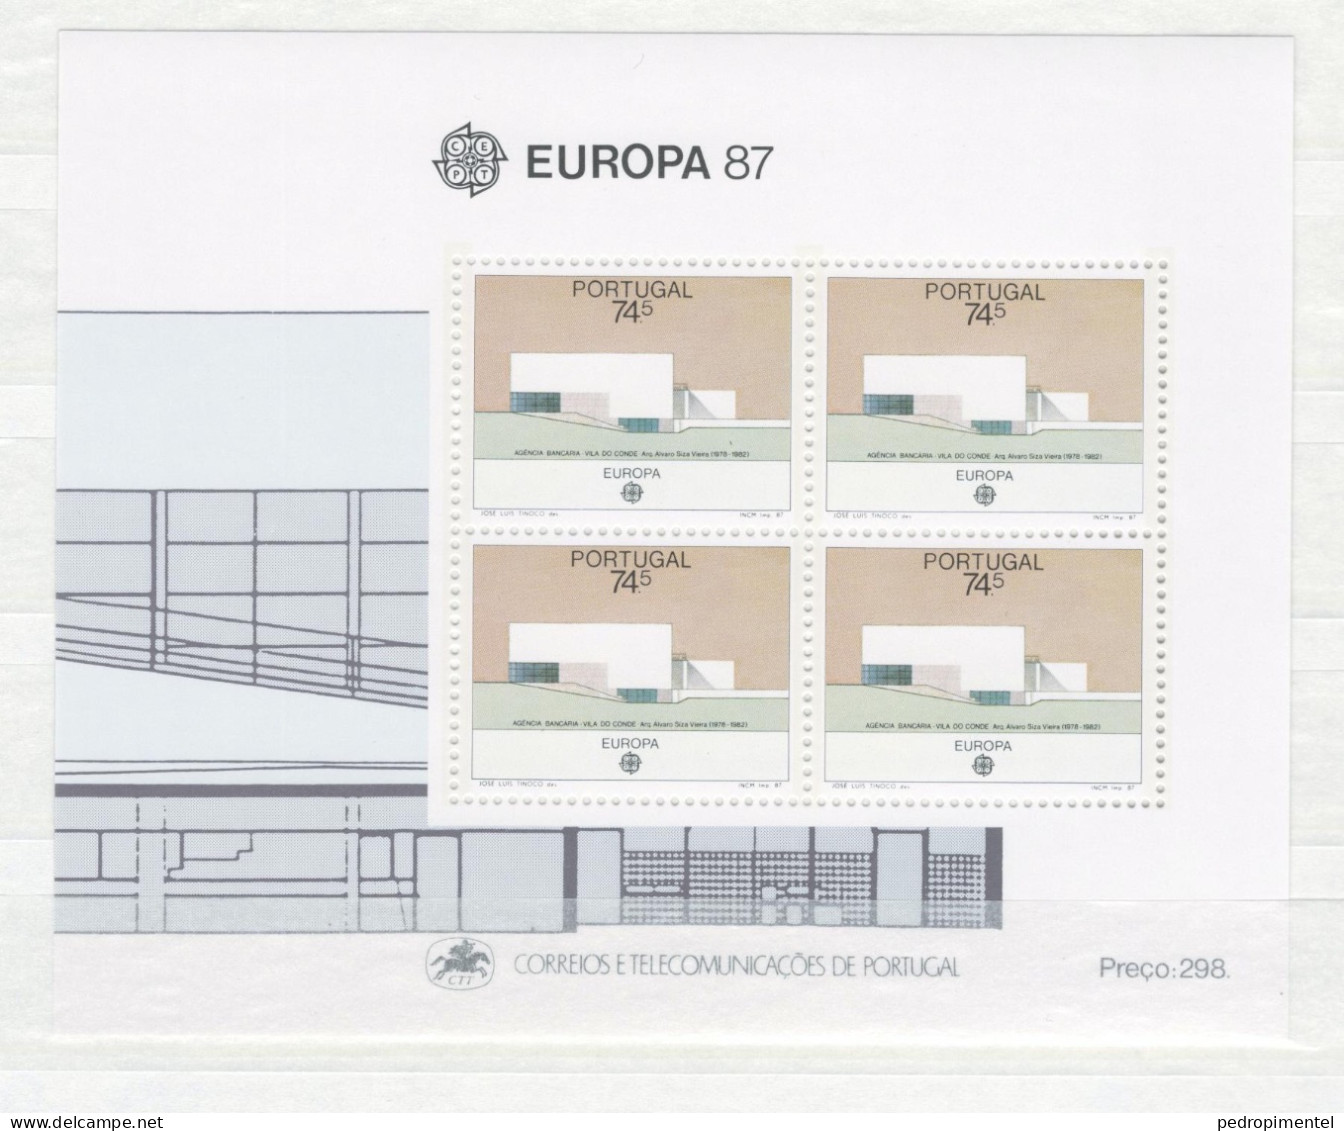 Portugal Madeira 1987 "Europa CEPT Architecture" Condition MNH OG Mundifil #1800&1801 (2 Minisheets) - Unused Stamps